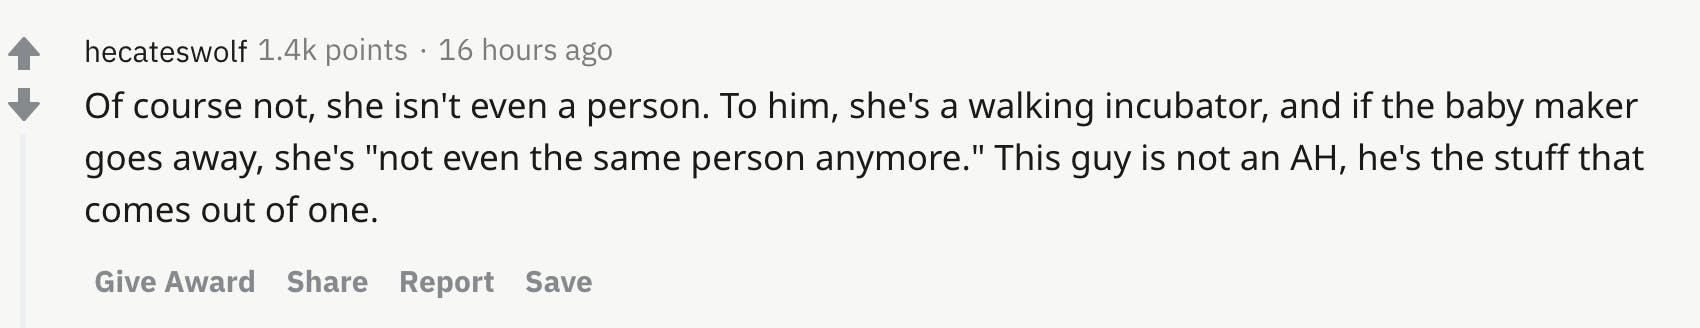 Of course not, she isn't even a person. To him, she's a walking incubator, and if the baby maker goes away, she's "not even the same person anymore." This guy is not an AH, he's the stuff that comes out of one.